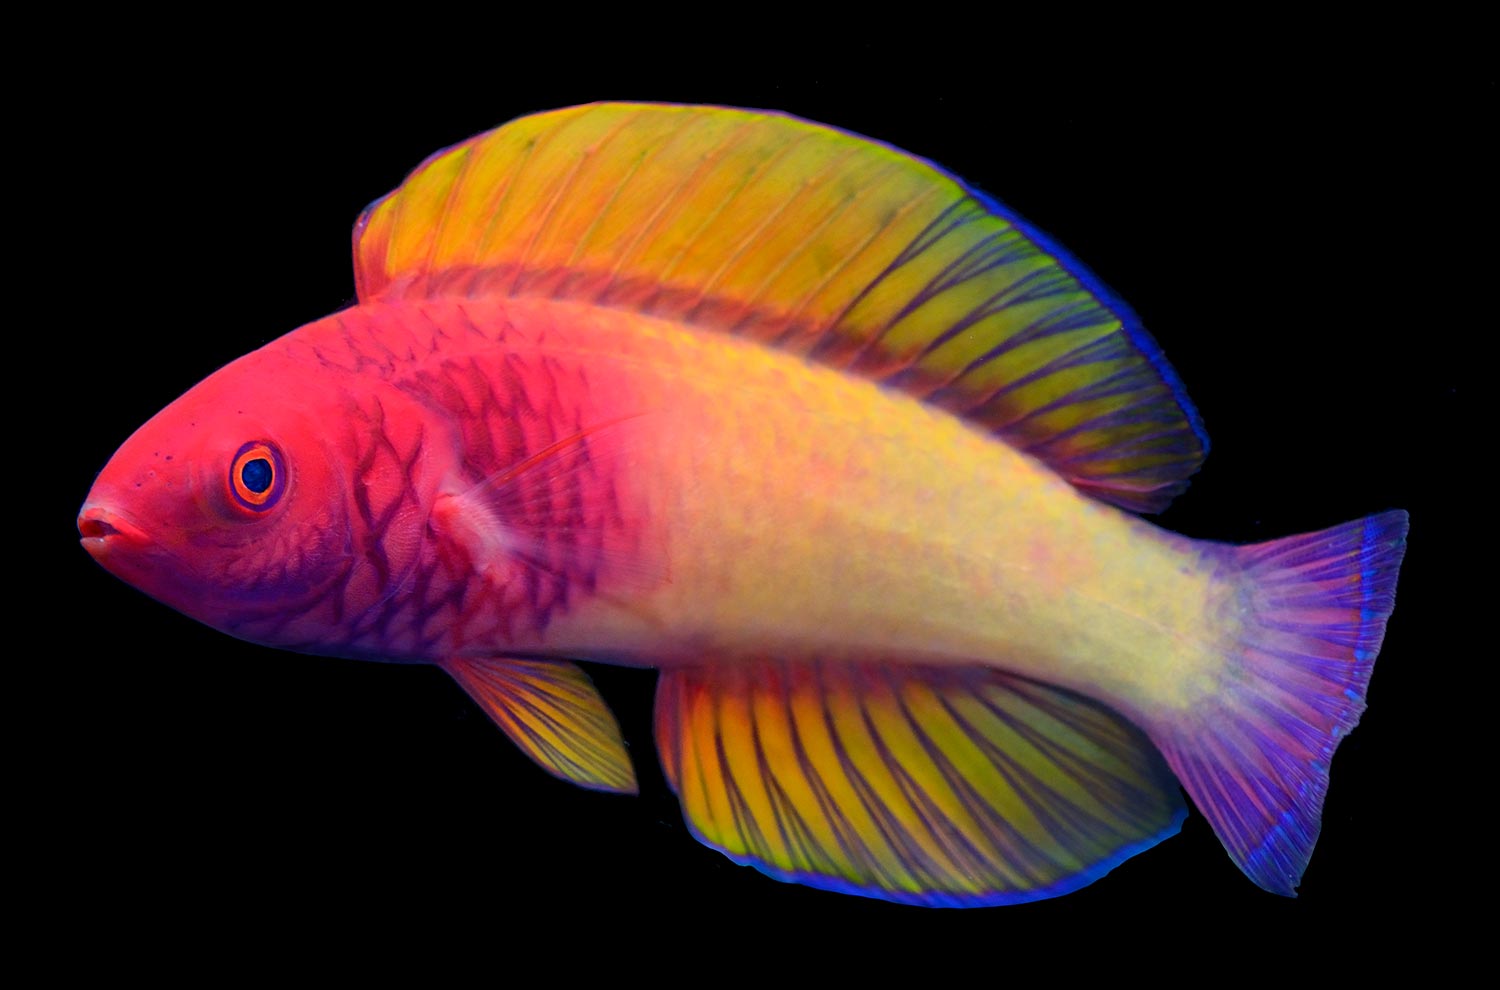 A fish with red, yellow, green, and purple coloring